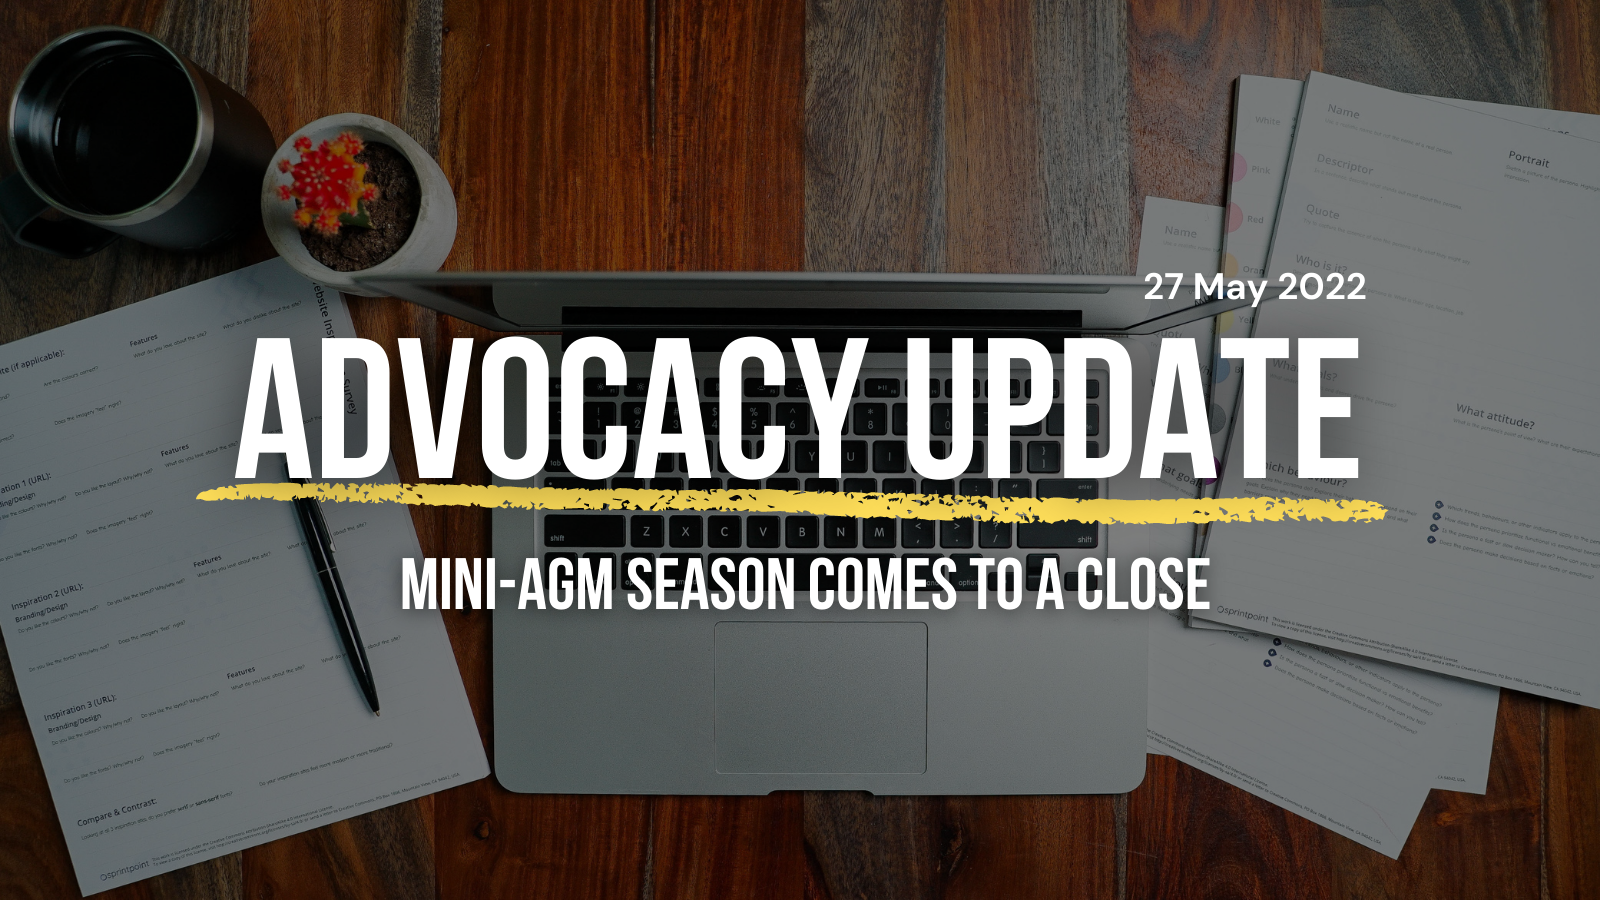 73. advocacy update - 27 may 2022